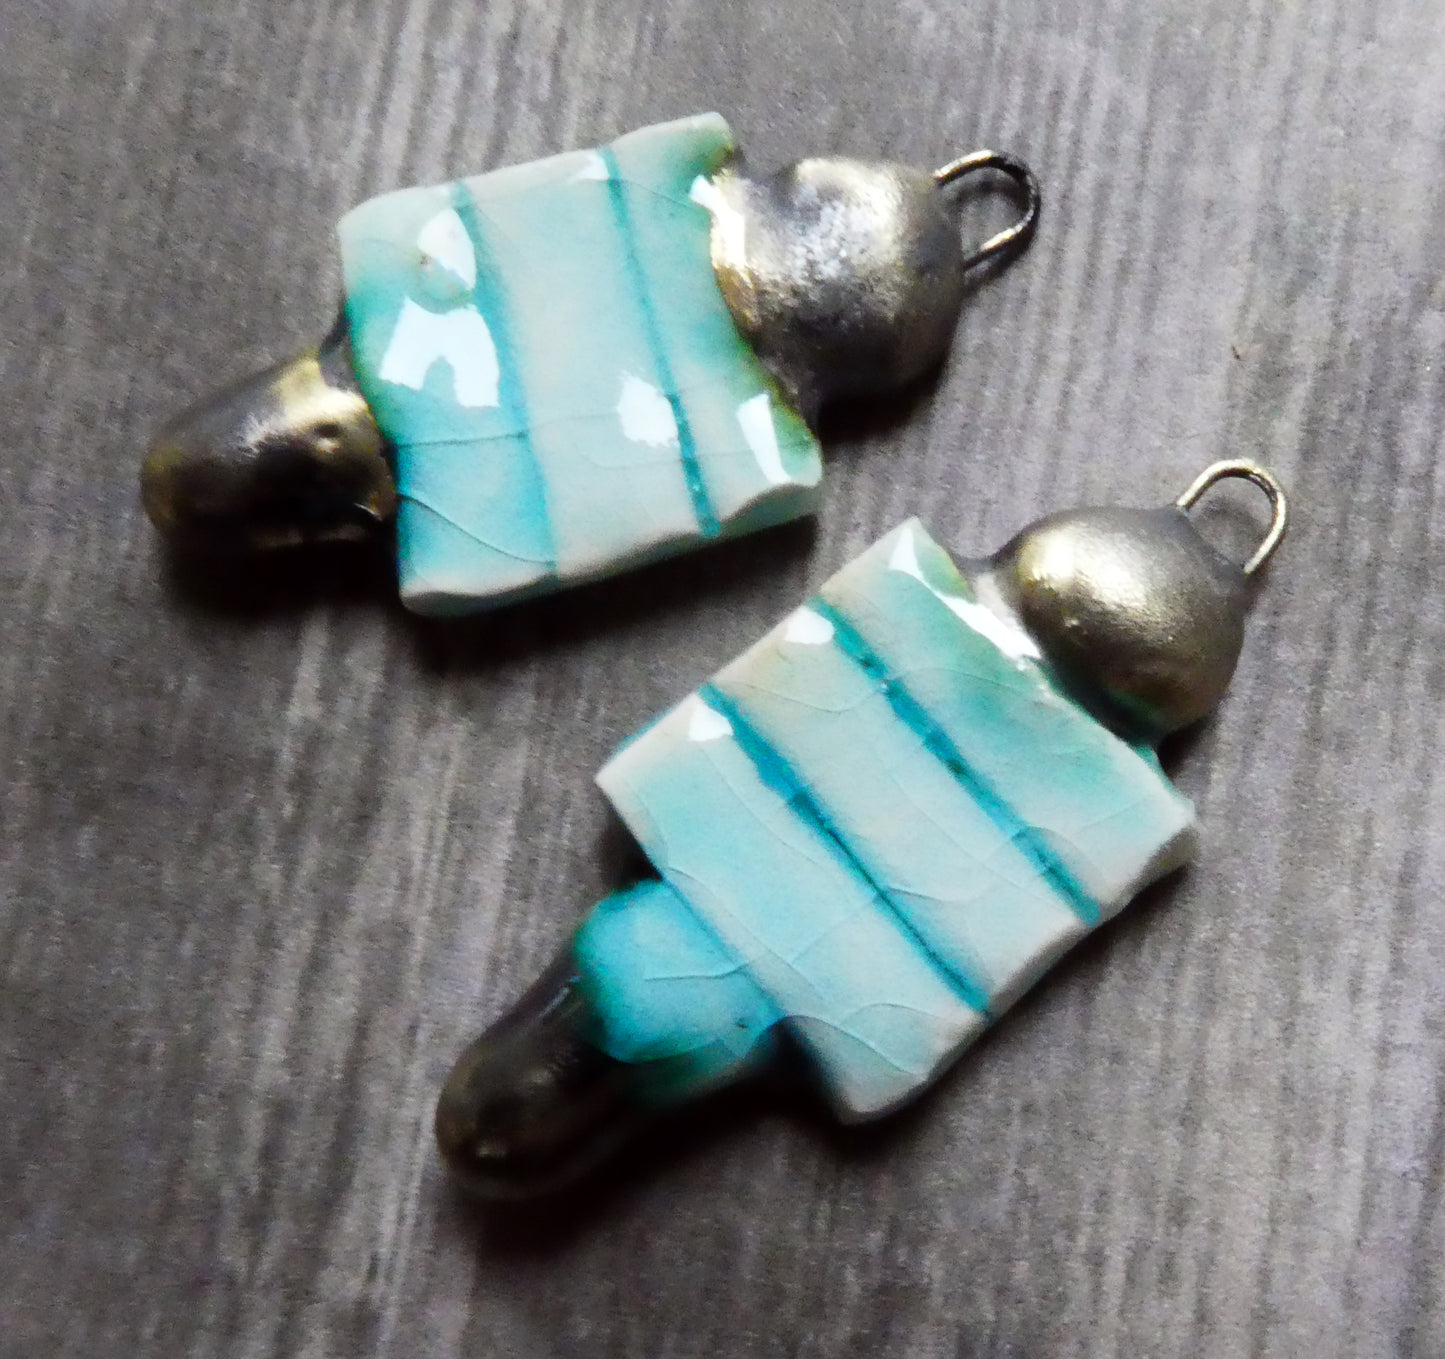 Ceramic Pointy Earring Charms -Turquoise Crackle